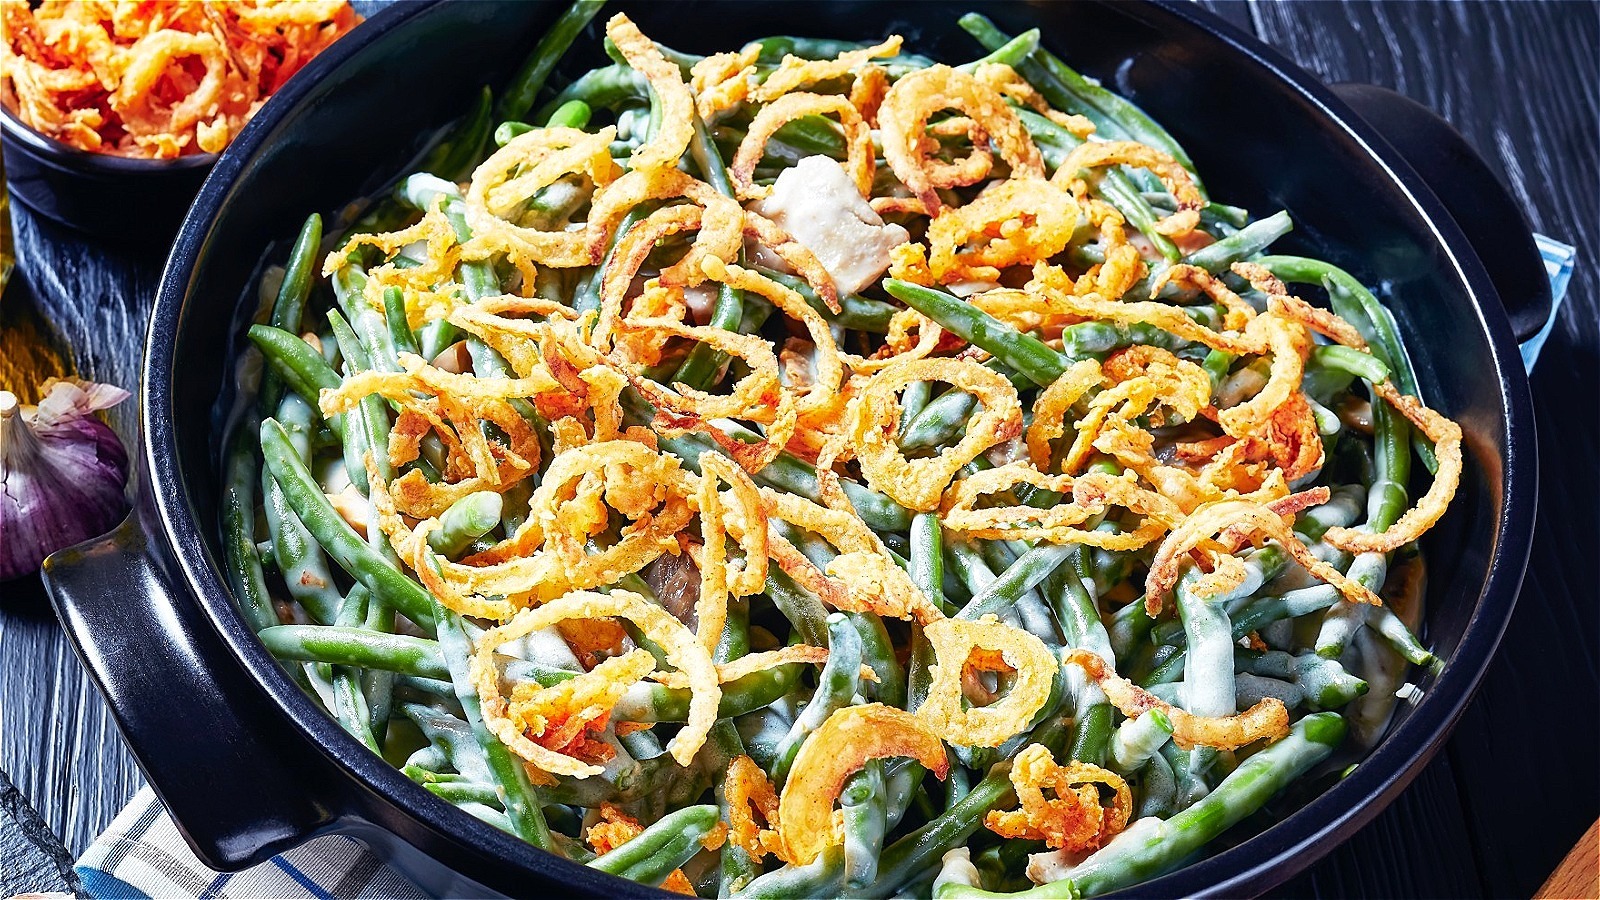 How To Avoid Mushy Green Beans For Your Green Bean Casserole